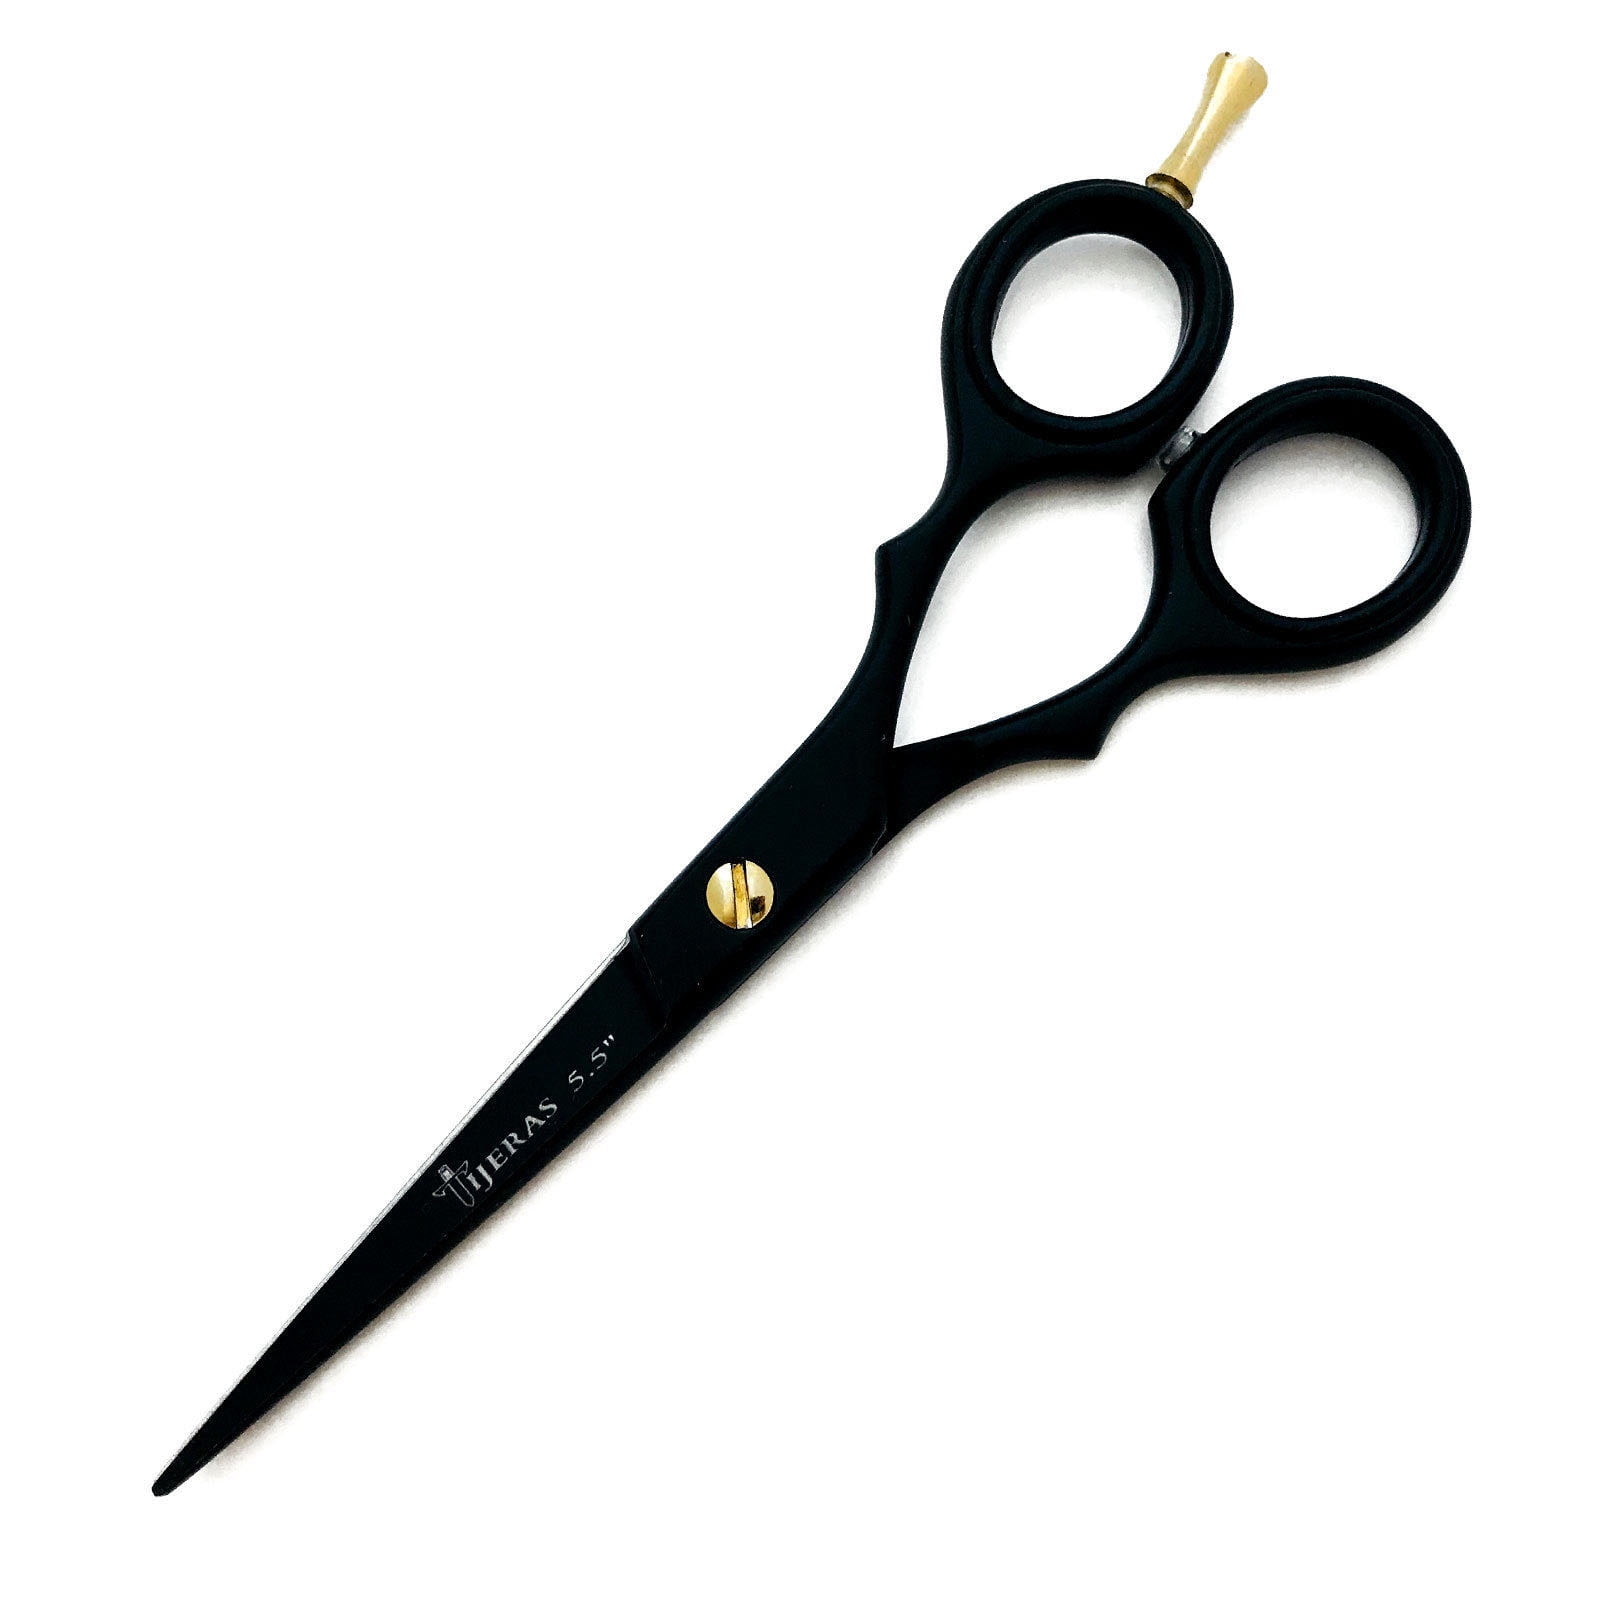 Equate Men's Professional Barber Wet and Dry Hair Cutting Thinning Adult  Scissors - 7 inch Blade